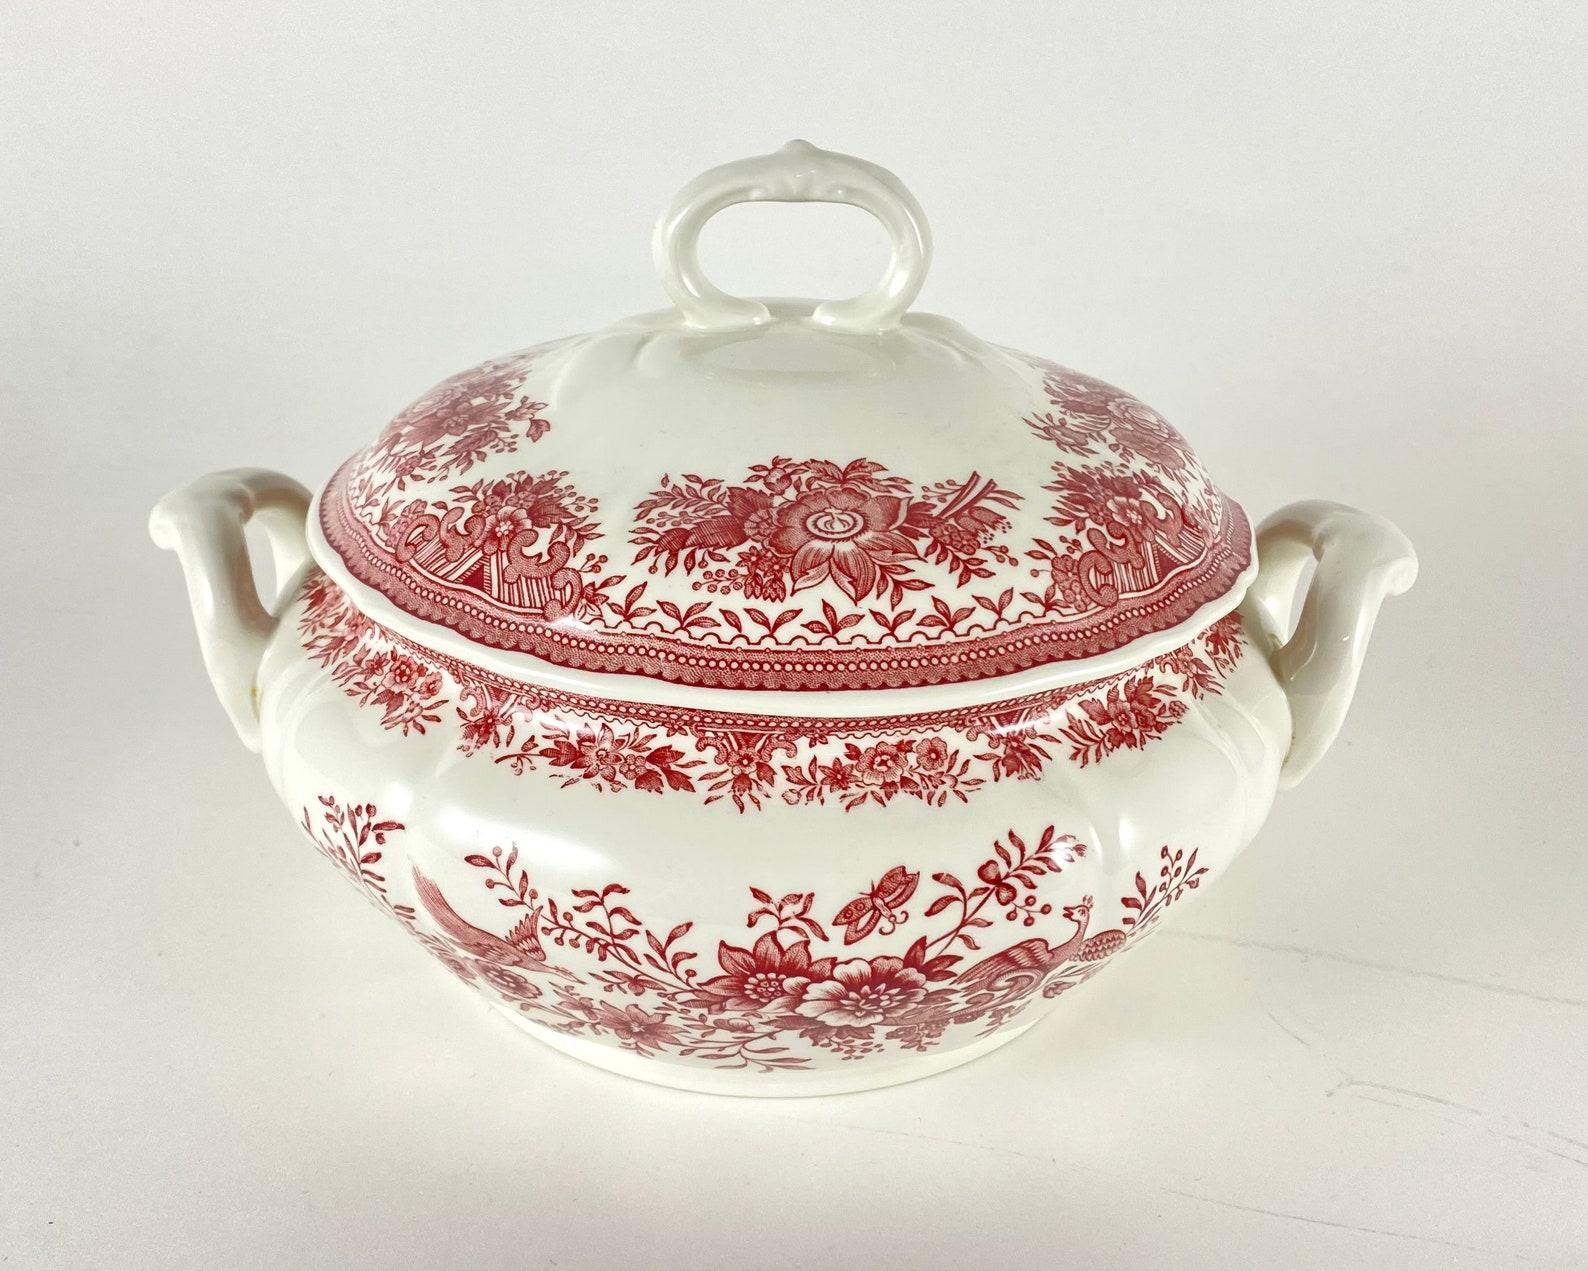 Villeroy & Boch Soup Tureen.

Red Fasan Pattern.

Long since discontinued.

Porcelain.

Large Tureen. 

Germany. 

An interesting, worthy thing for serving a festive table.

A Bowl for serving the table will provide a beautiful